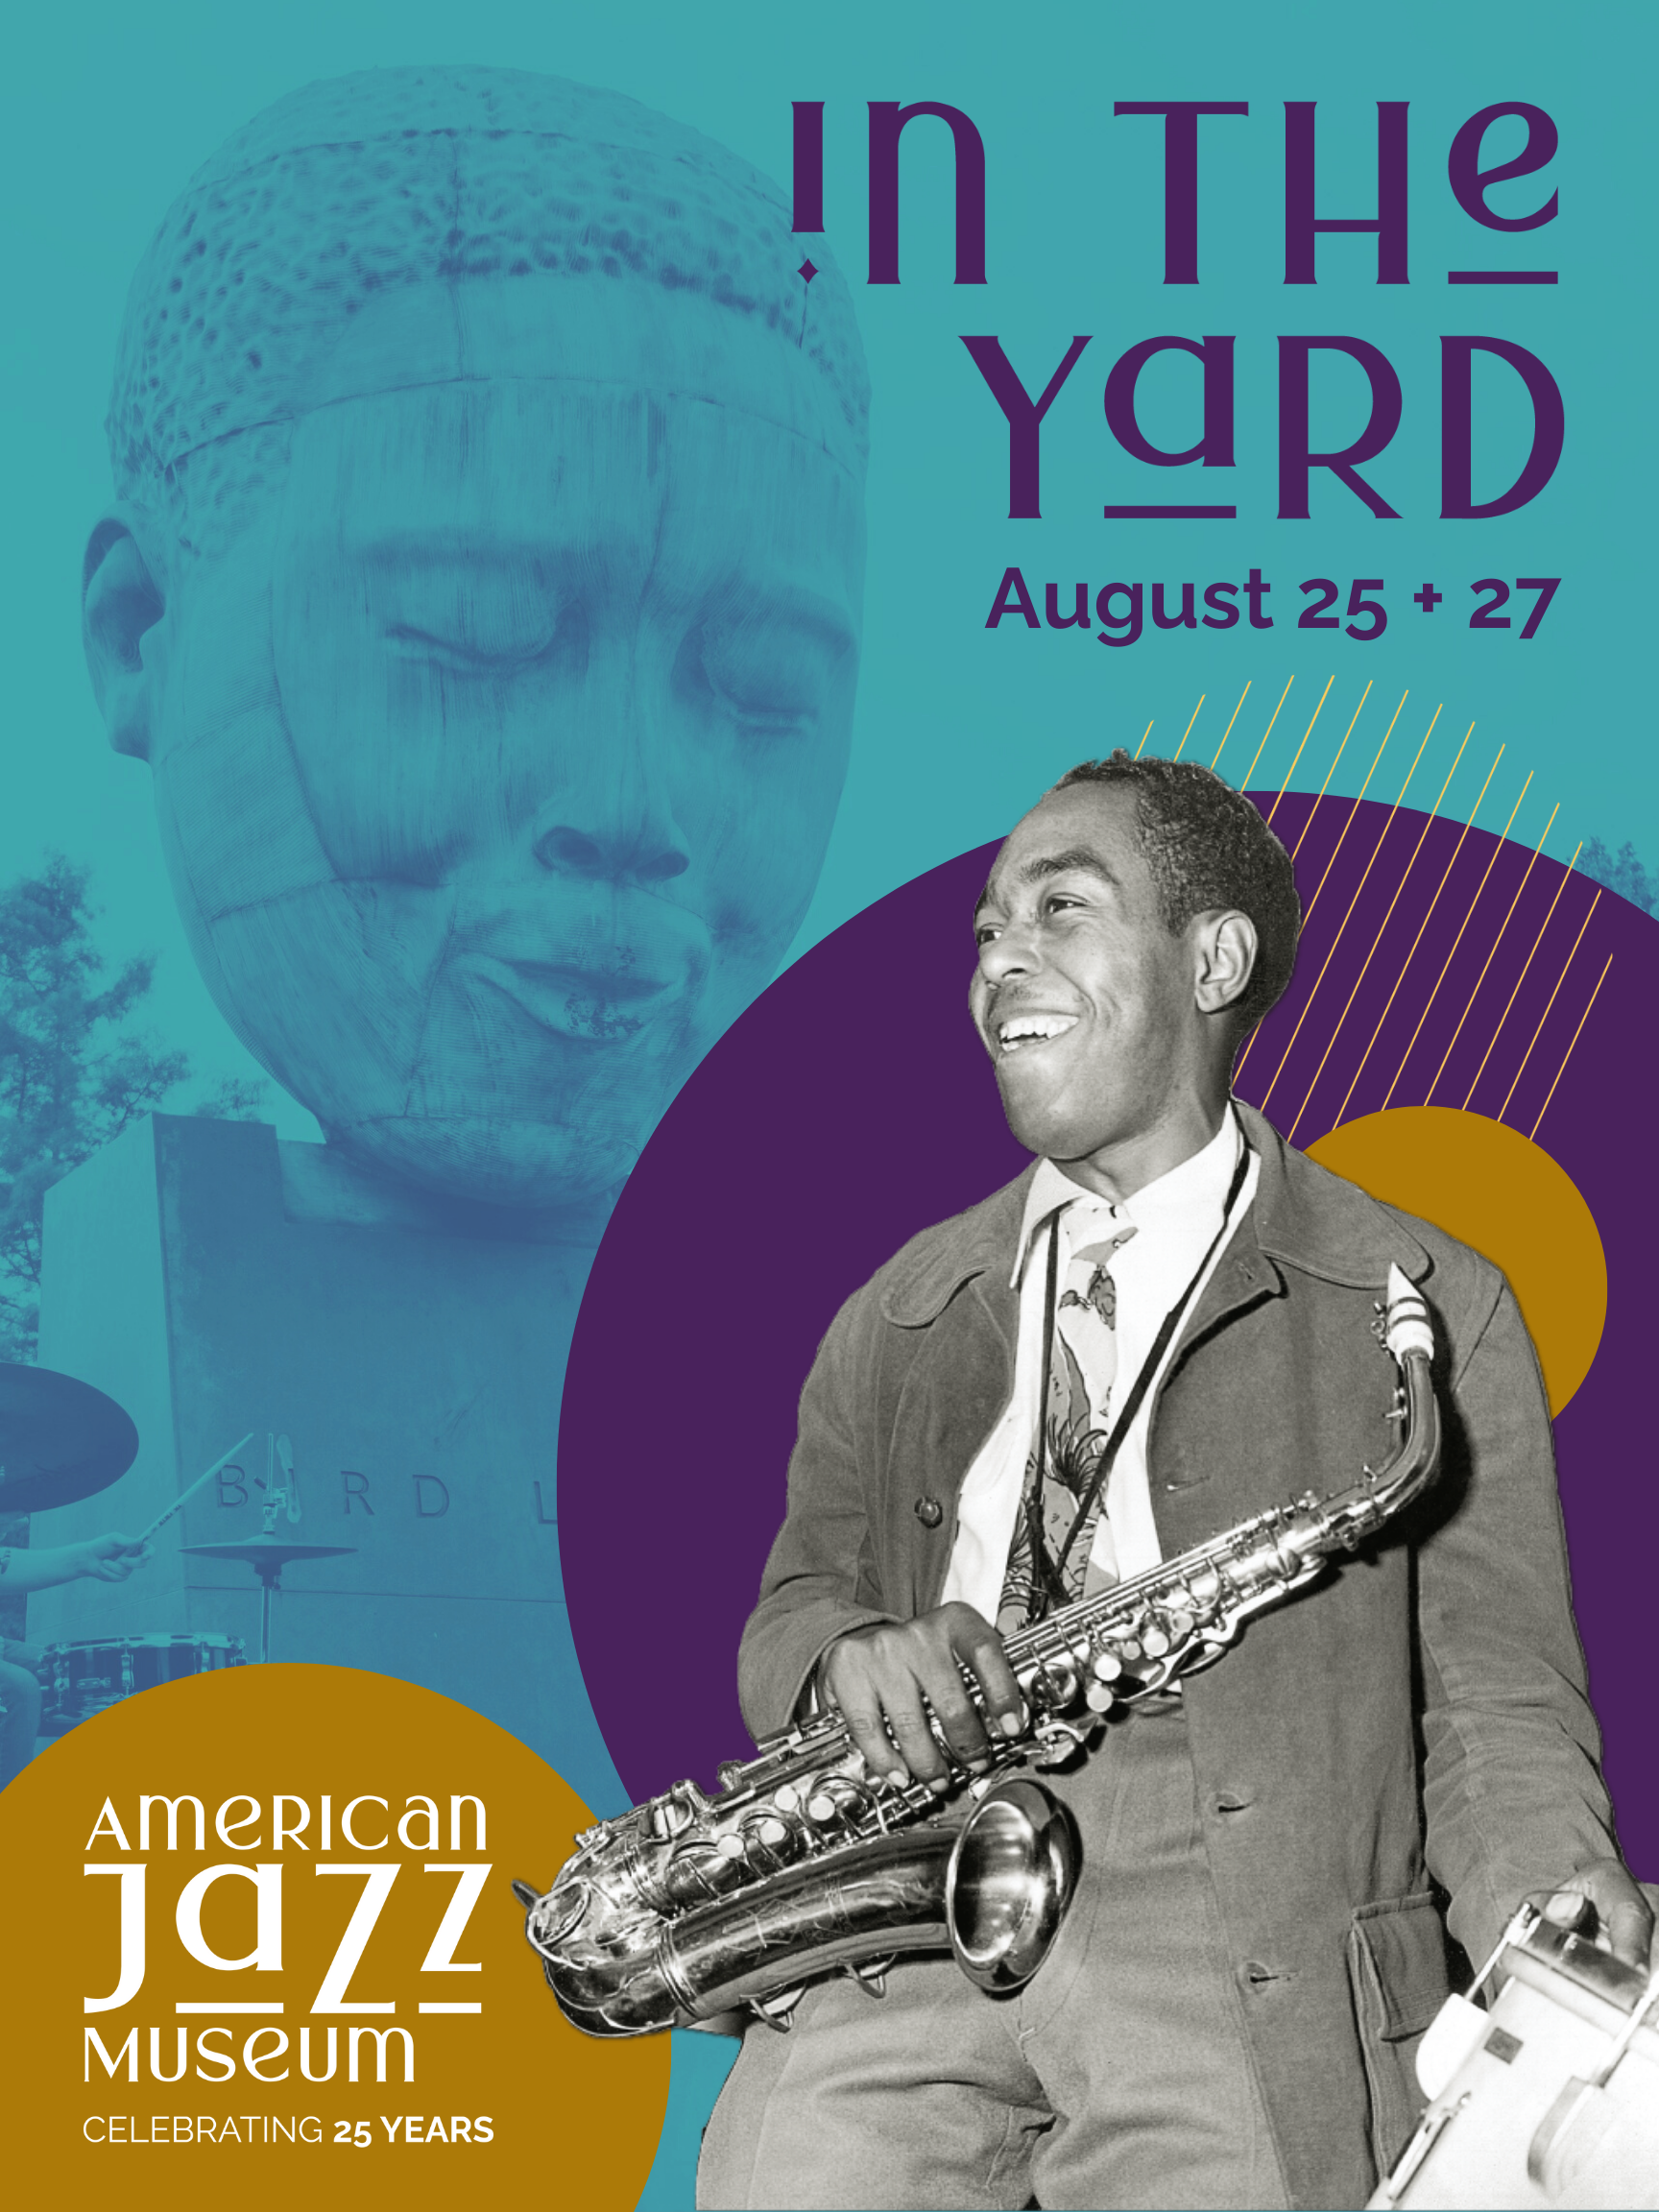 “In the Yard” Outdoor Concert – Jackiem Joyner and the Shedrick Mitchell Trio featuring Christie Dashiell